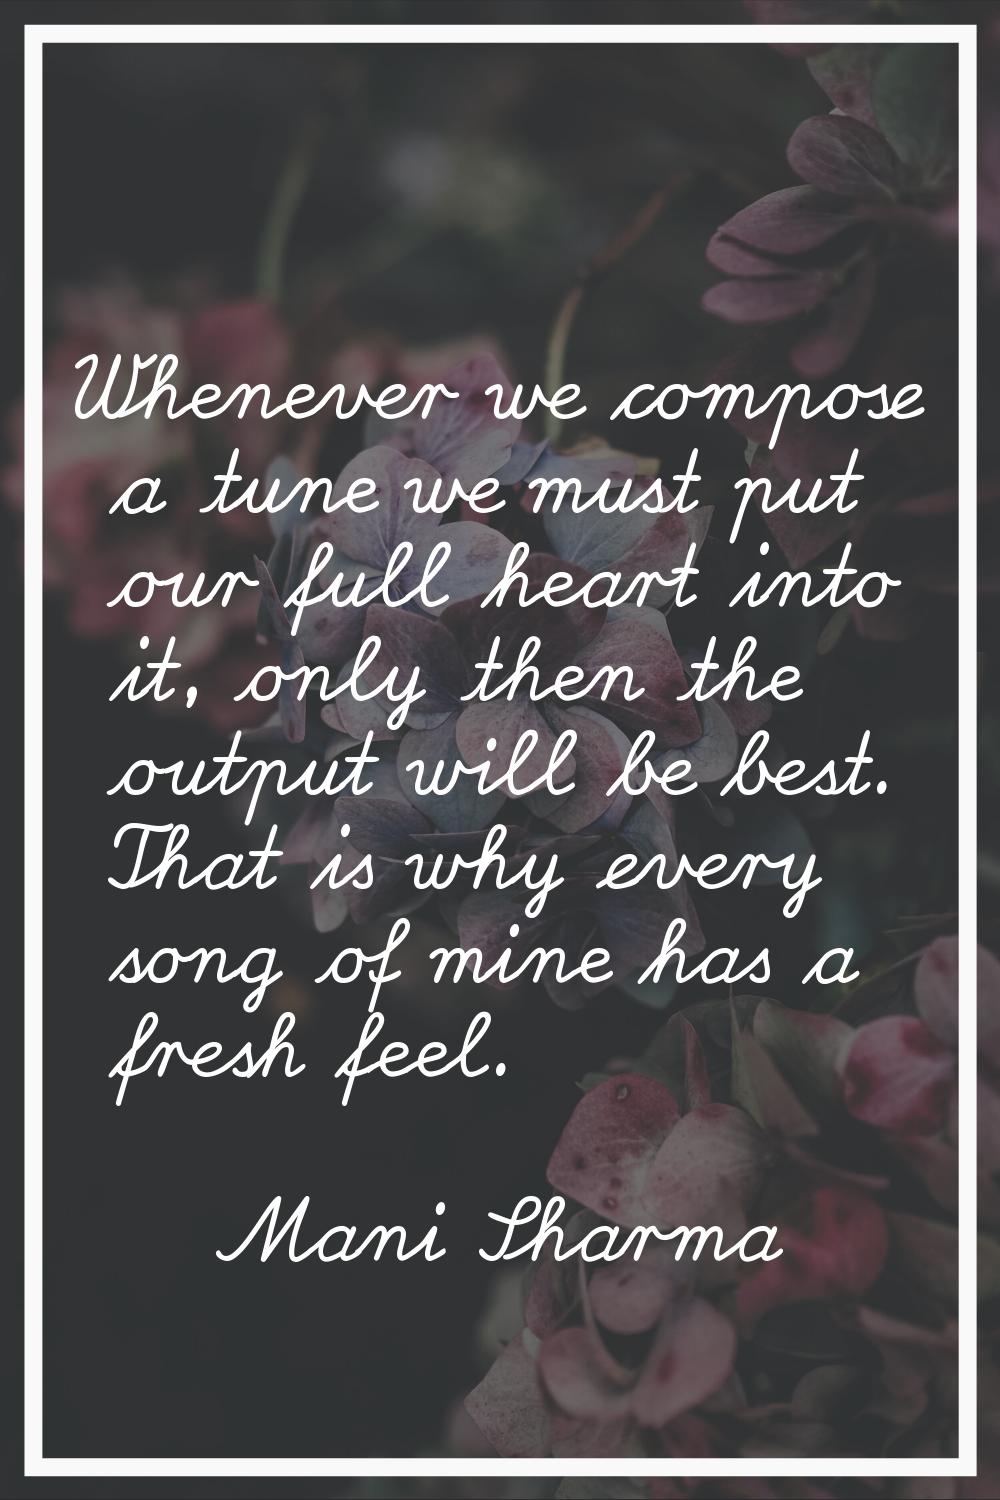 Whenever we compose a tune we must put our full heart into it, only then the output will be best. T